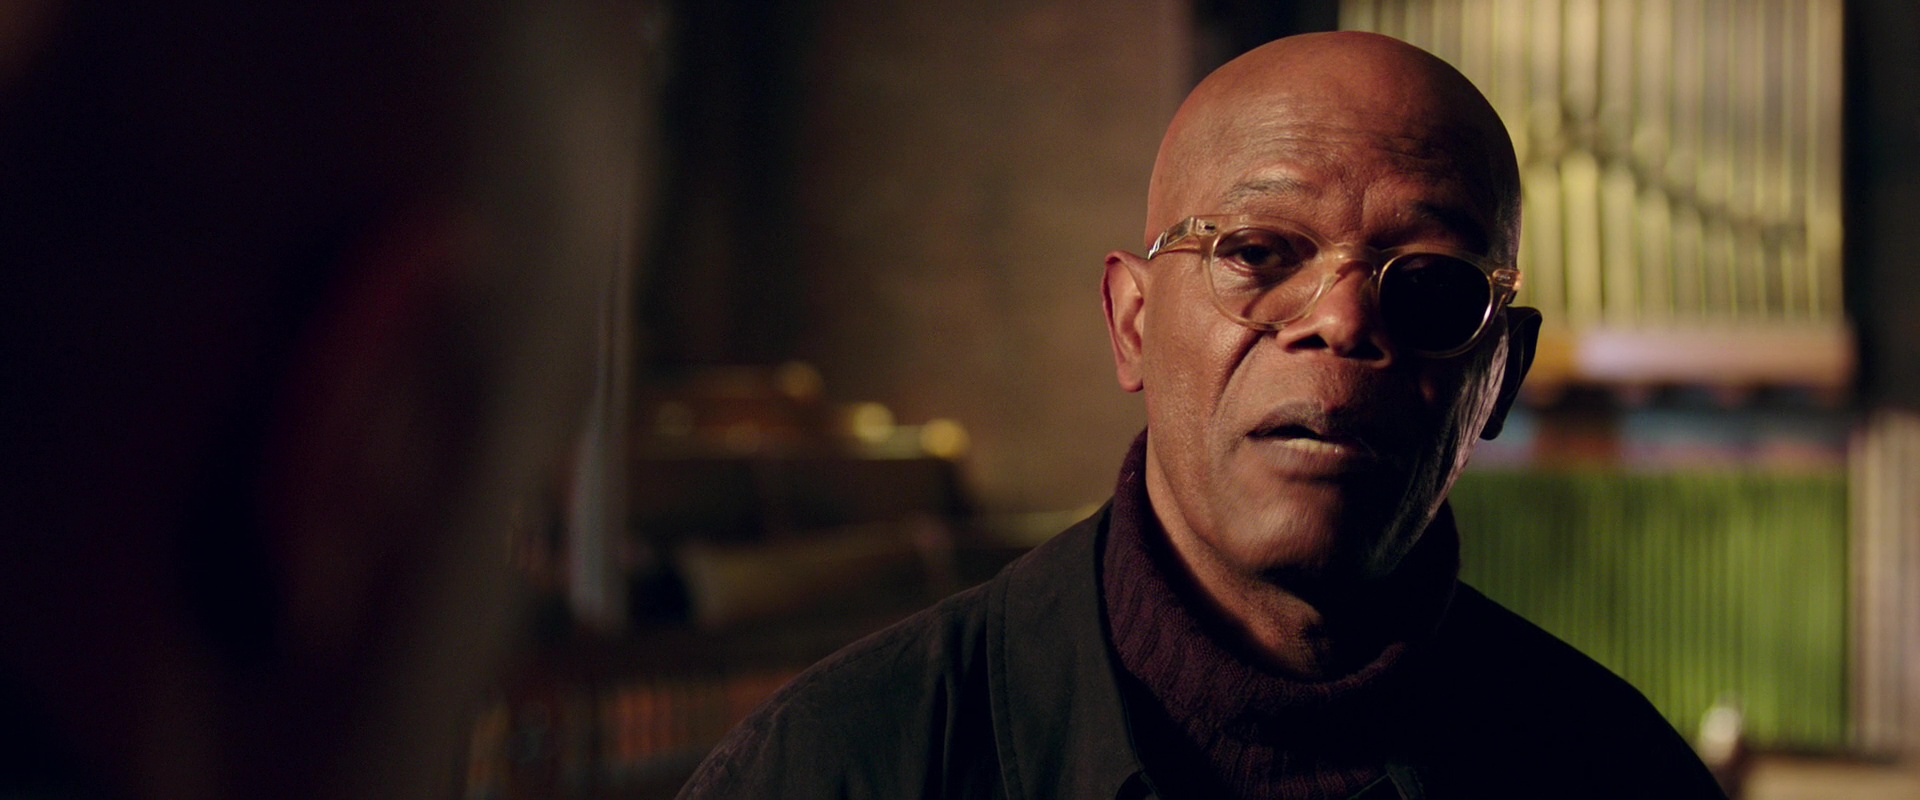 Old Focals Icon Sunglasses Worn by Samuel Leroy Jackson in xXx: Return of Xander Cage ...1920 x 800